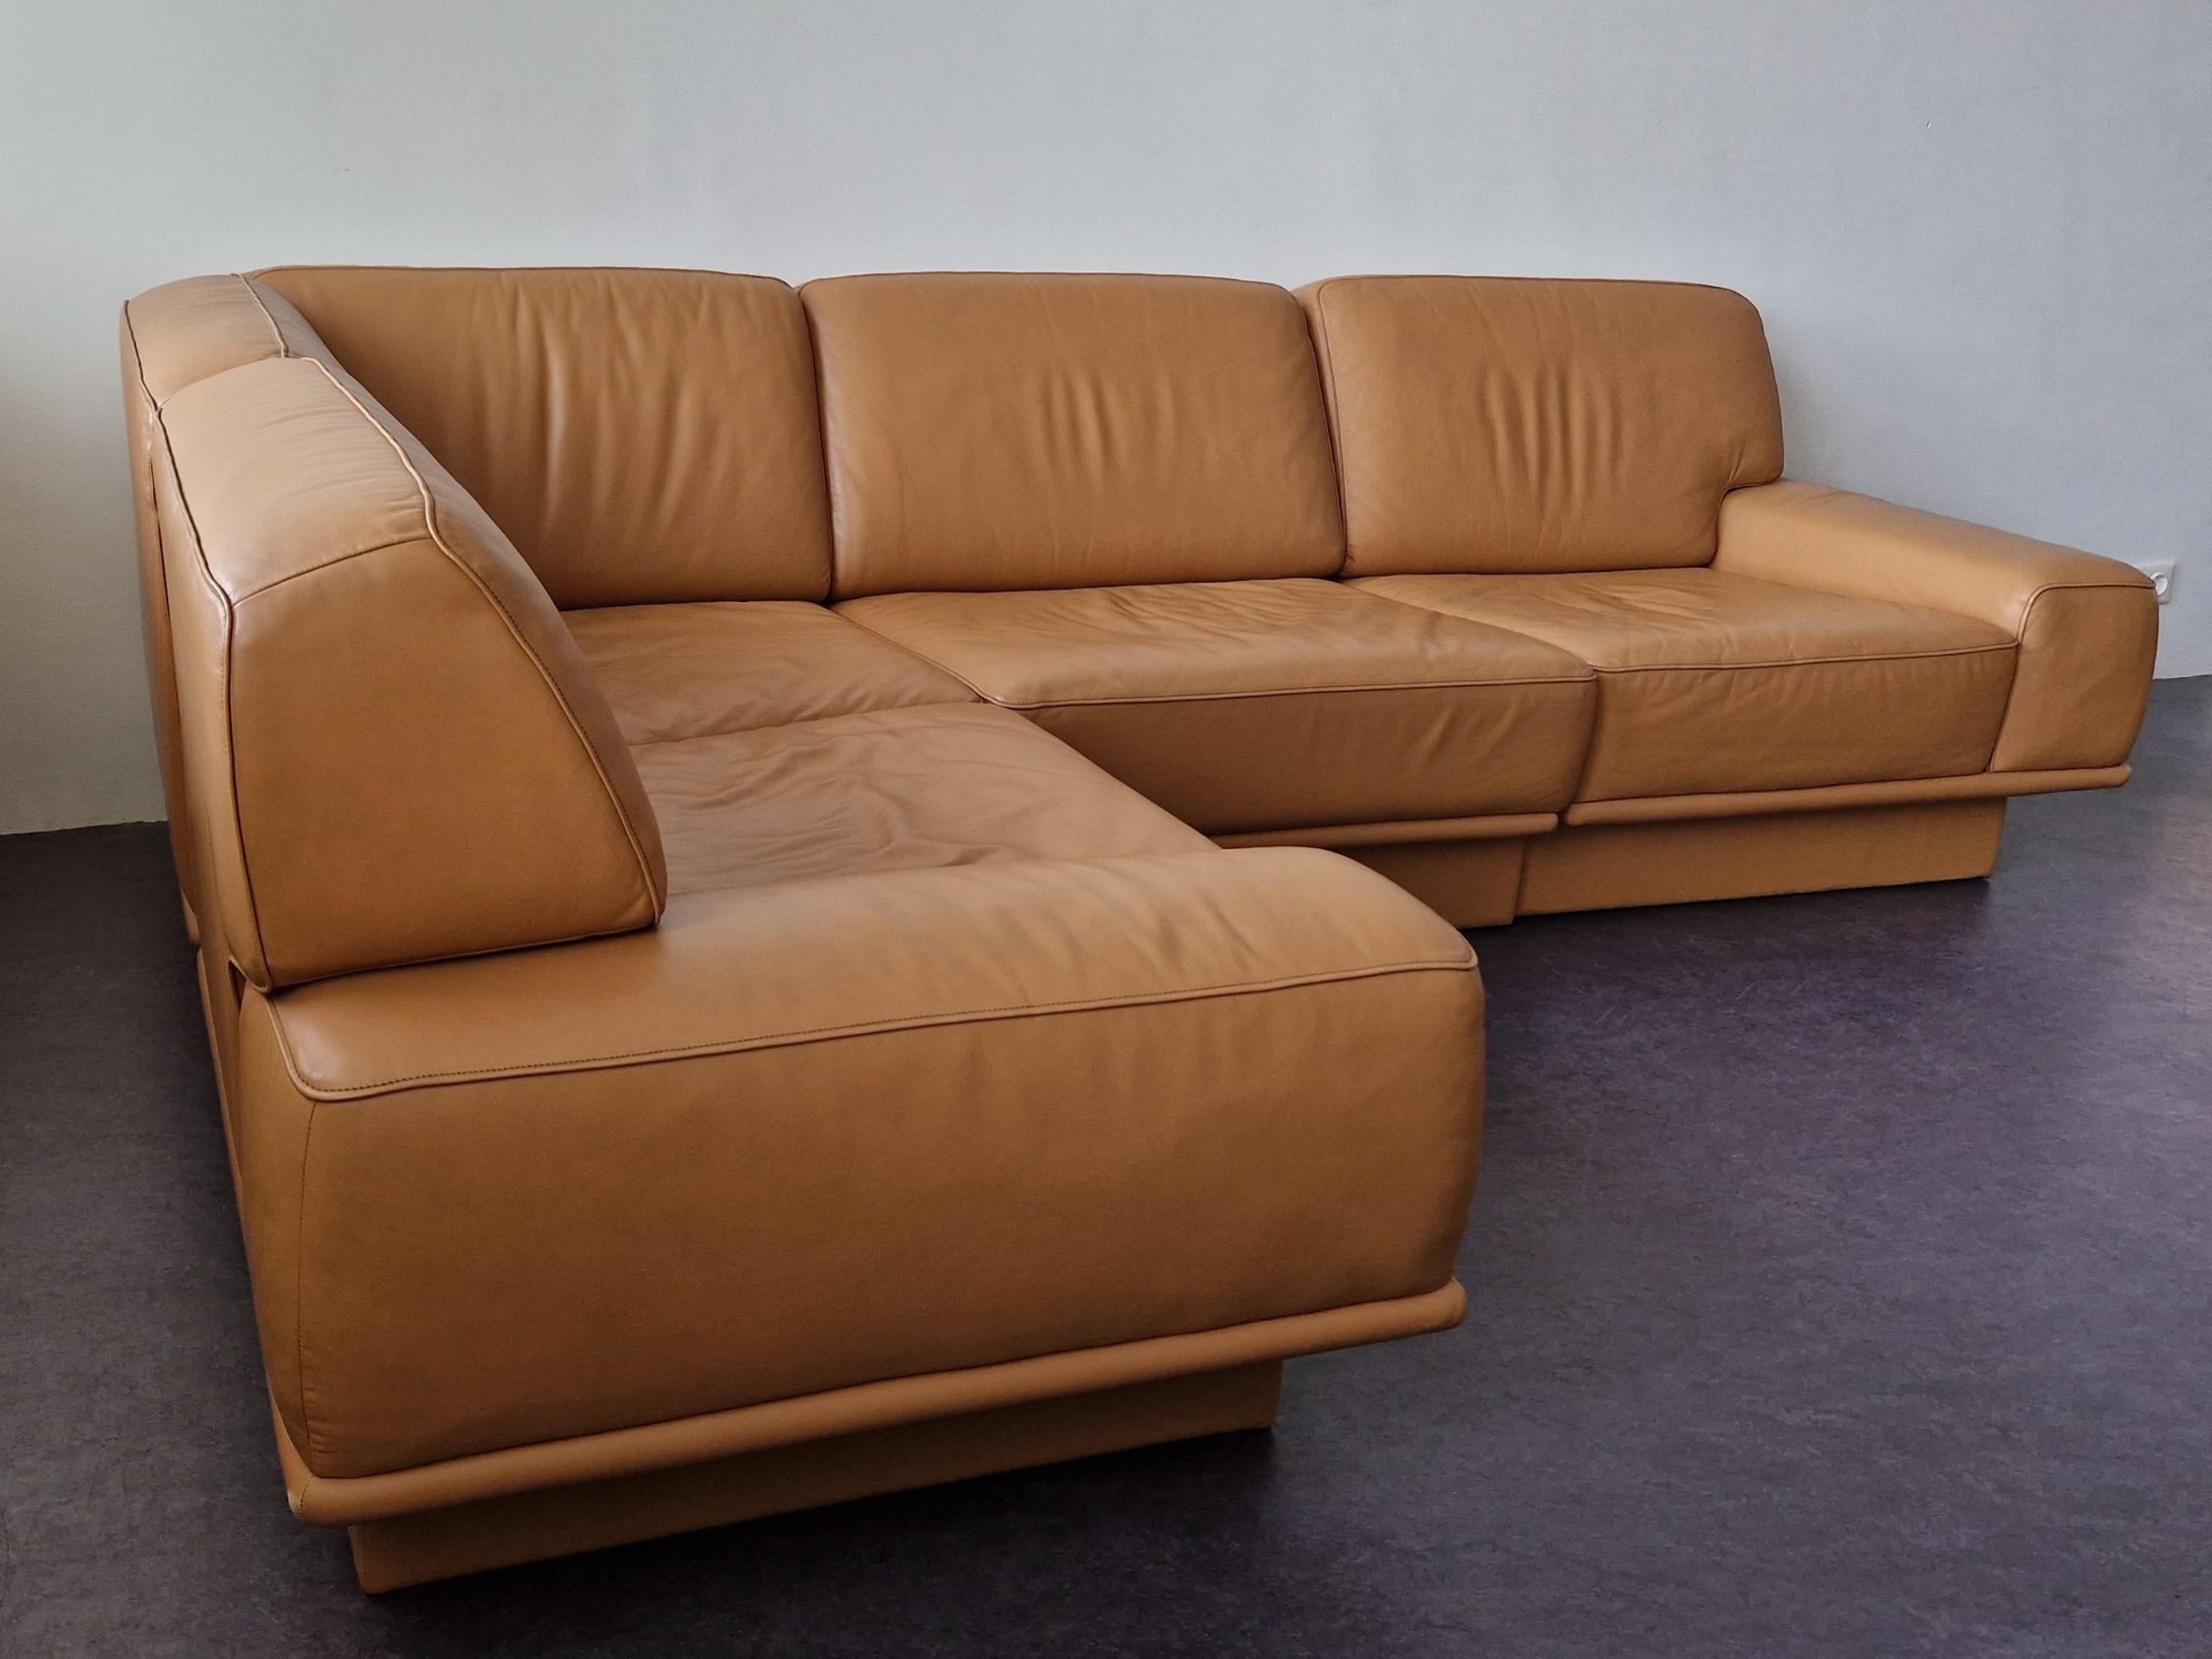 Swiss Midcentury Leather Sectional Corner Sofa by De Sede, Switzerland For Sale